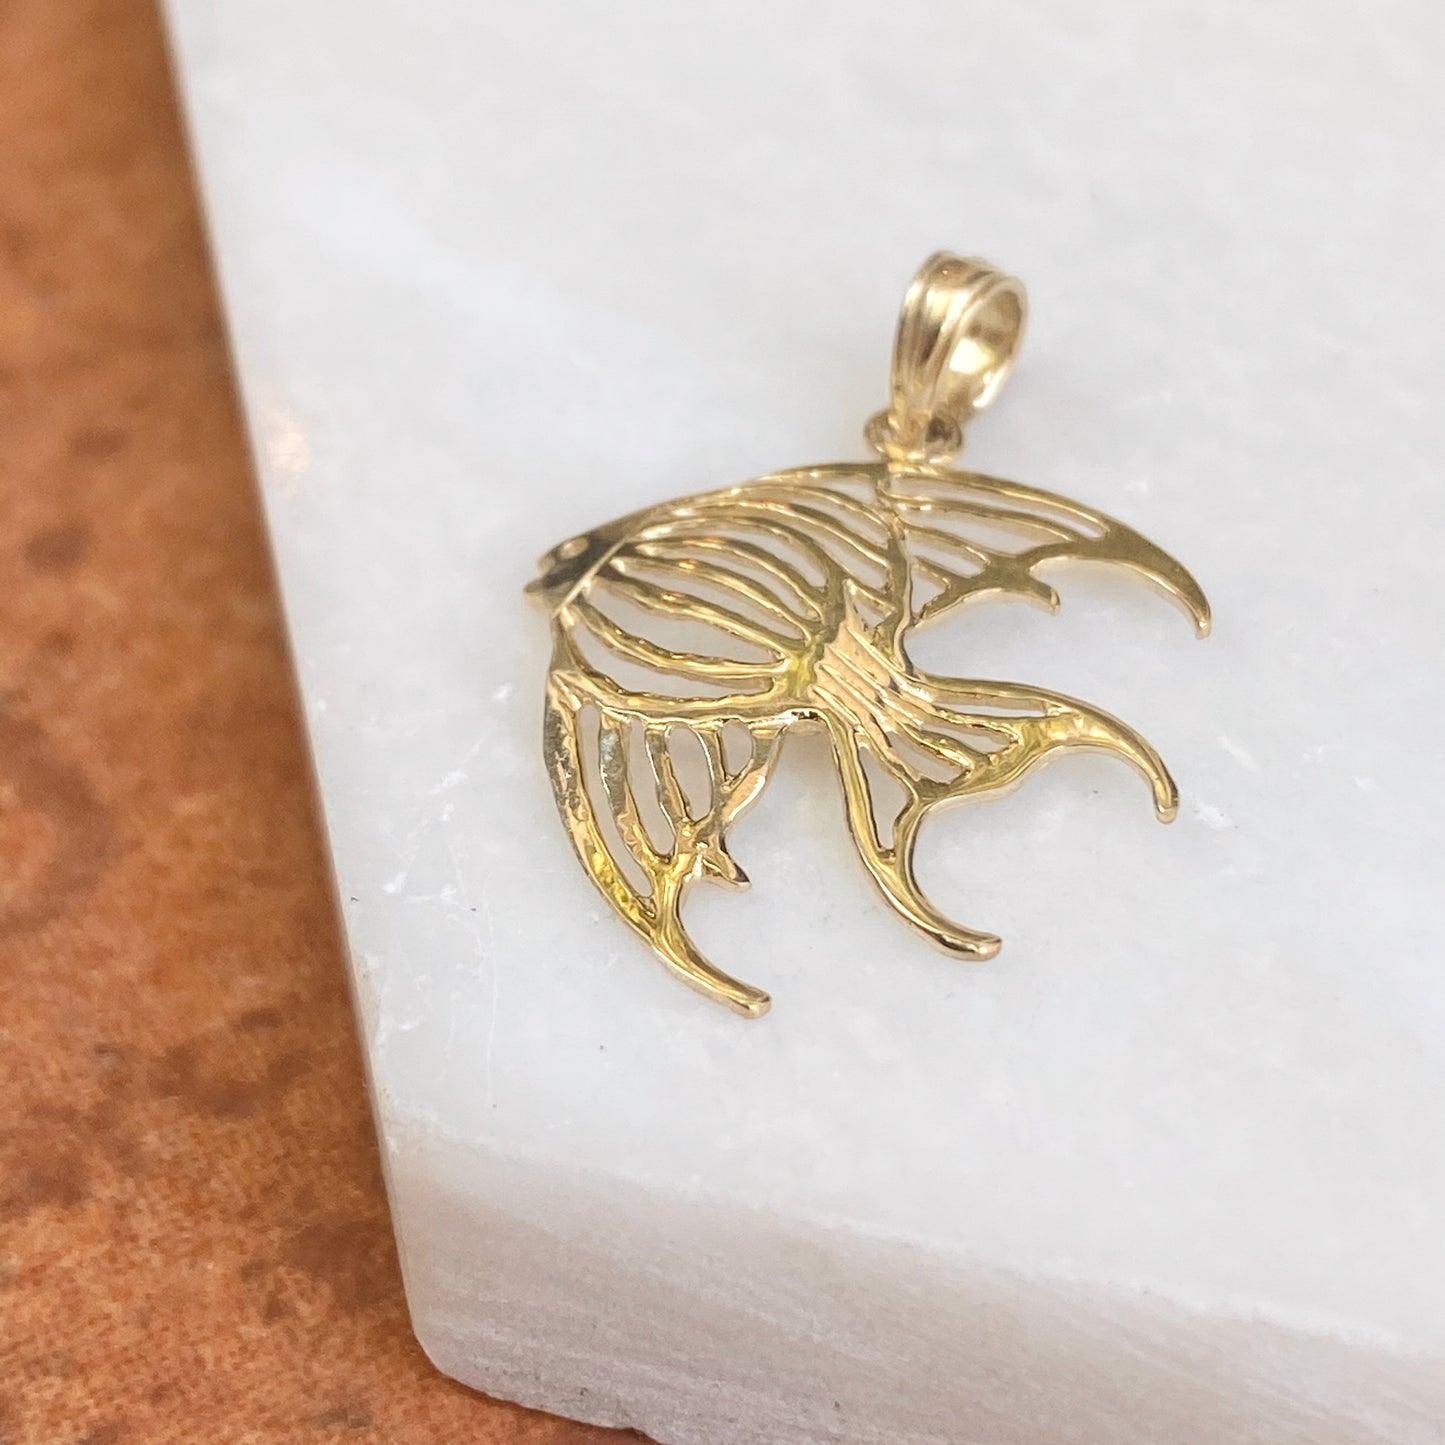 10KT Yellow Gold Polished Cut-Out Angelfish Pendant Charm, 10KT Yellow Gold Polished Cut-Out Angelfish Pendant Charm - Legacy Saint Jewelry